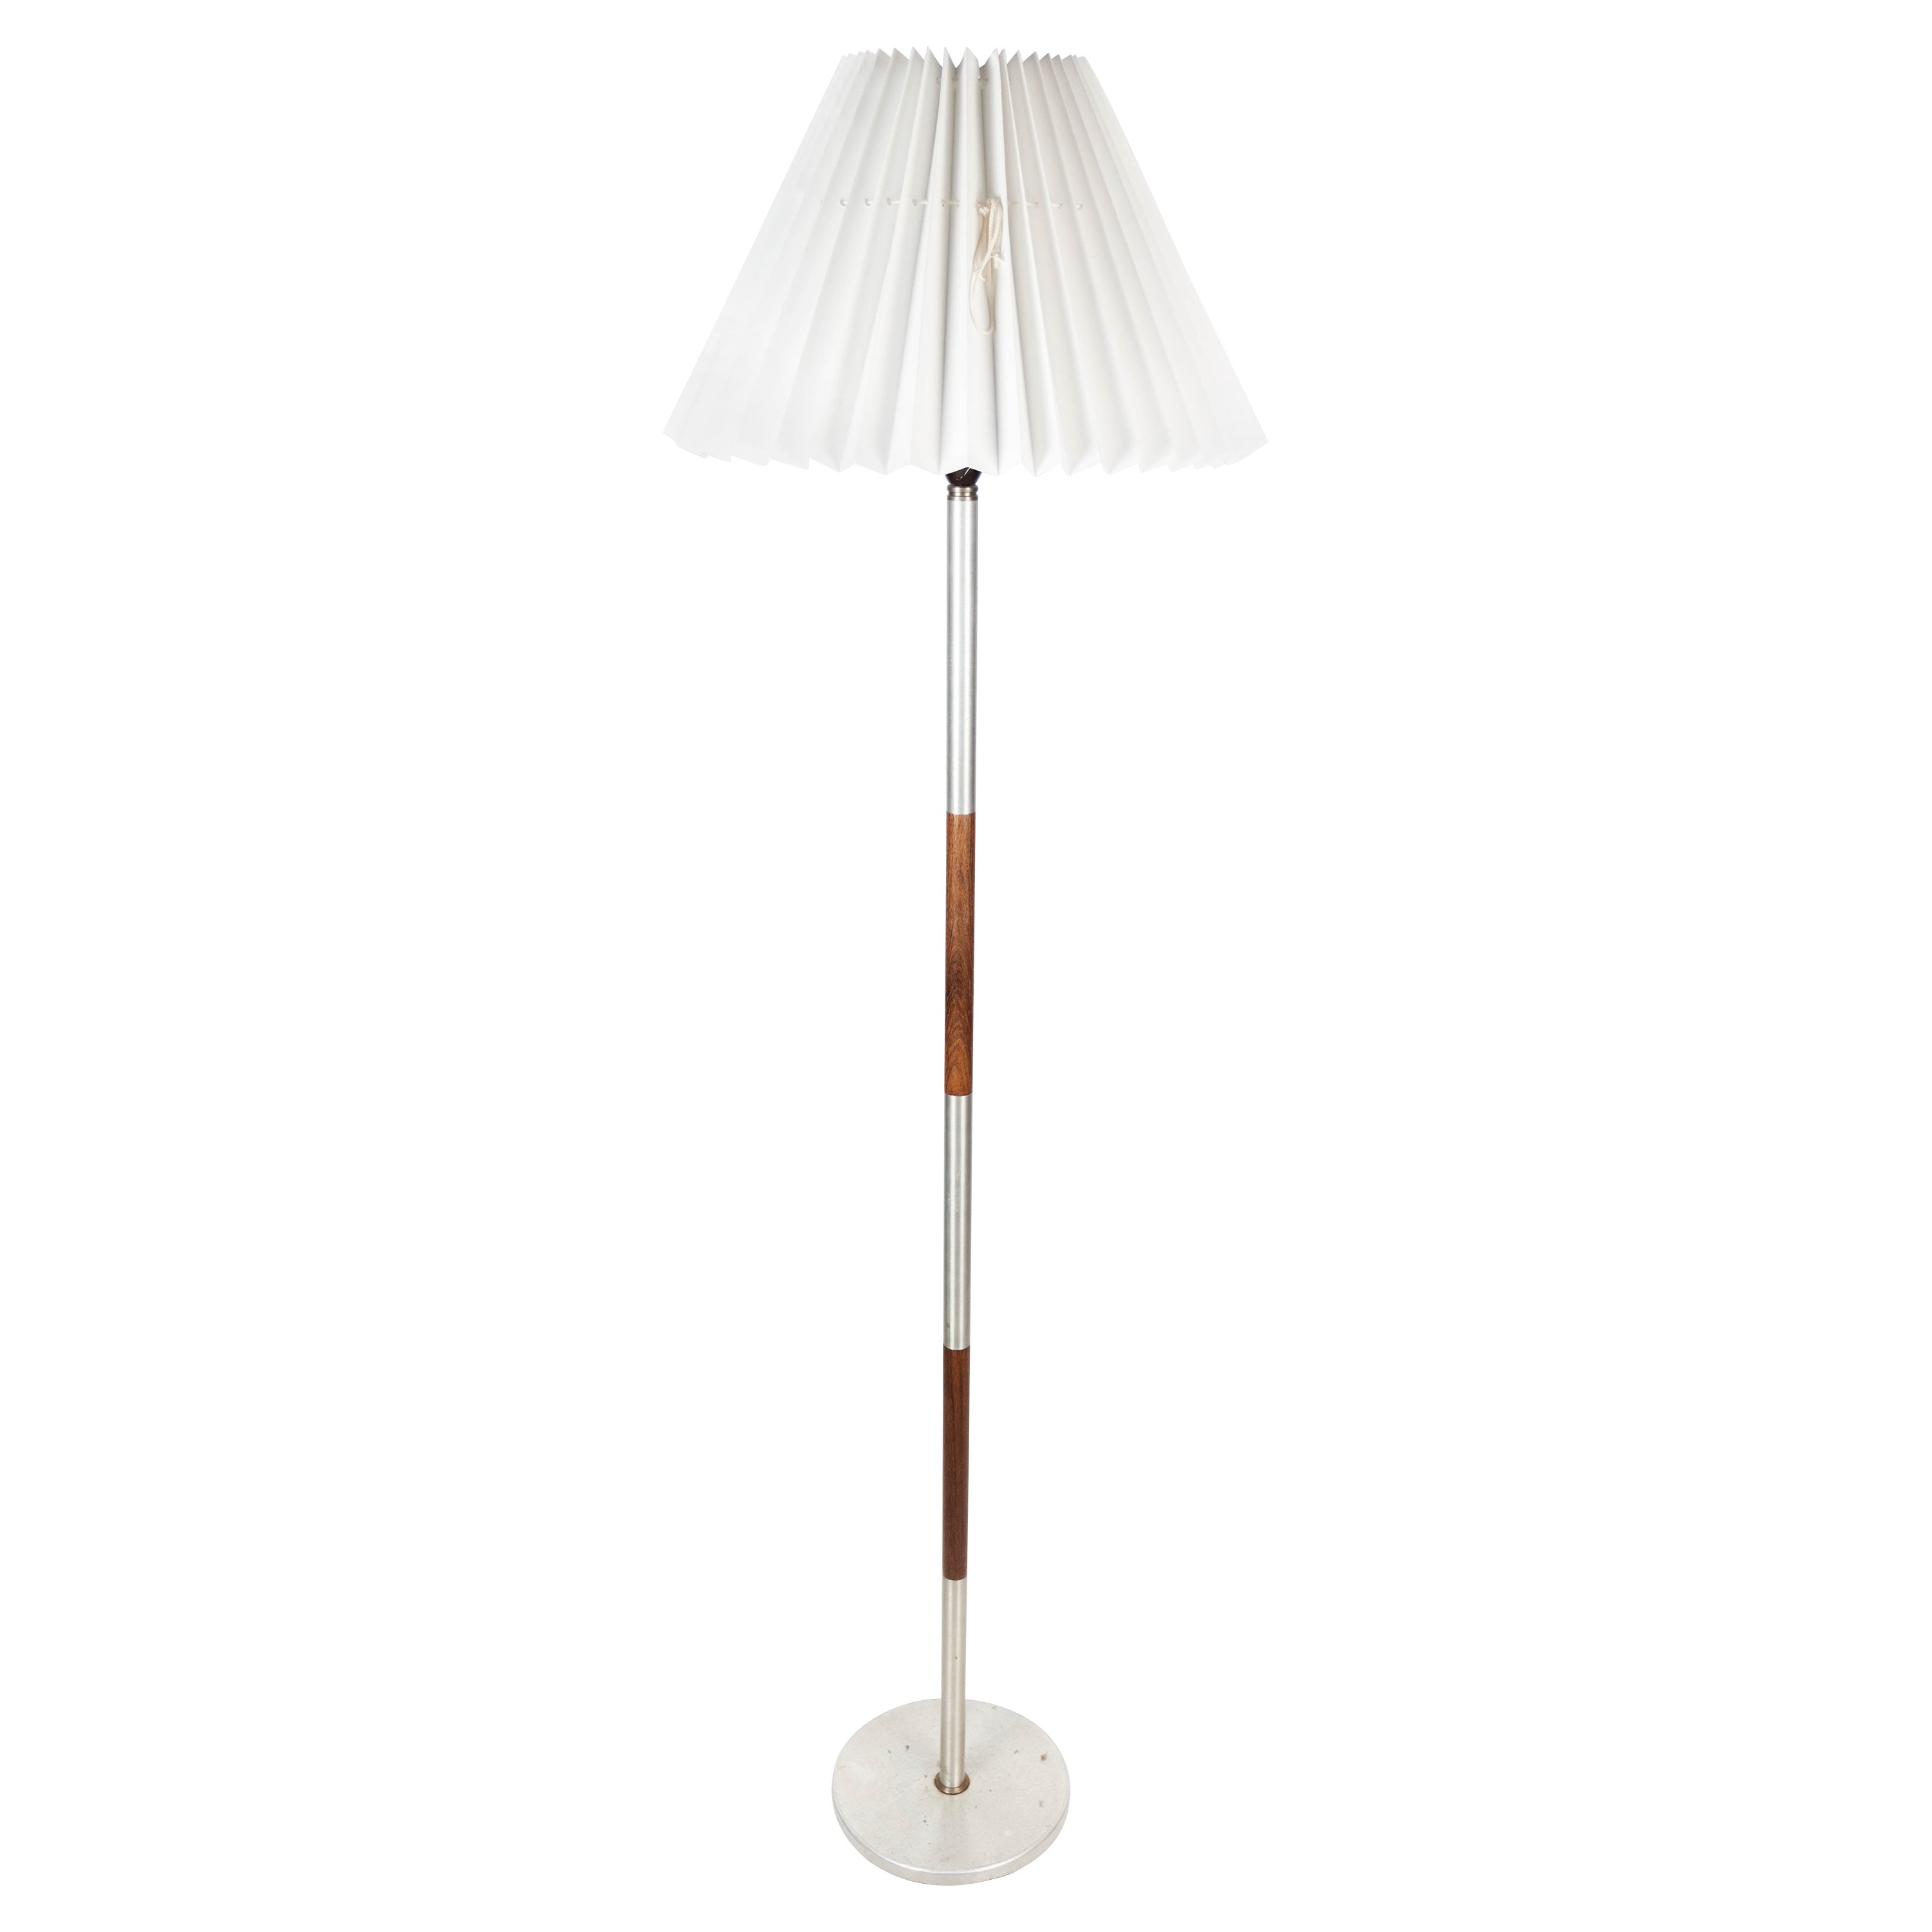 Floor Lamp in Rosewood and Metal, of Danish Design from the 1960s